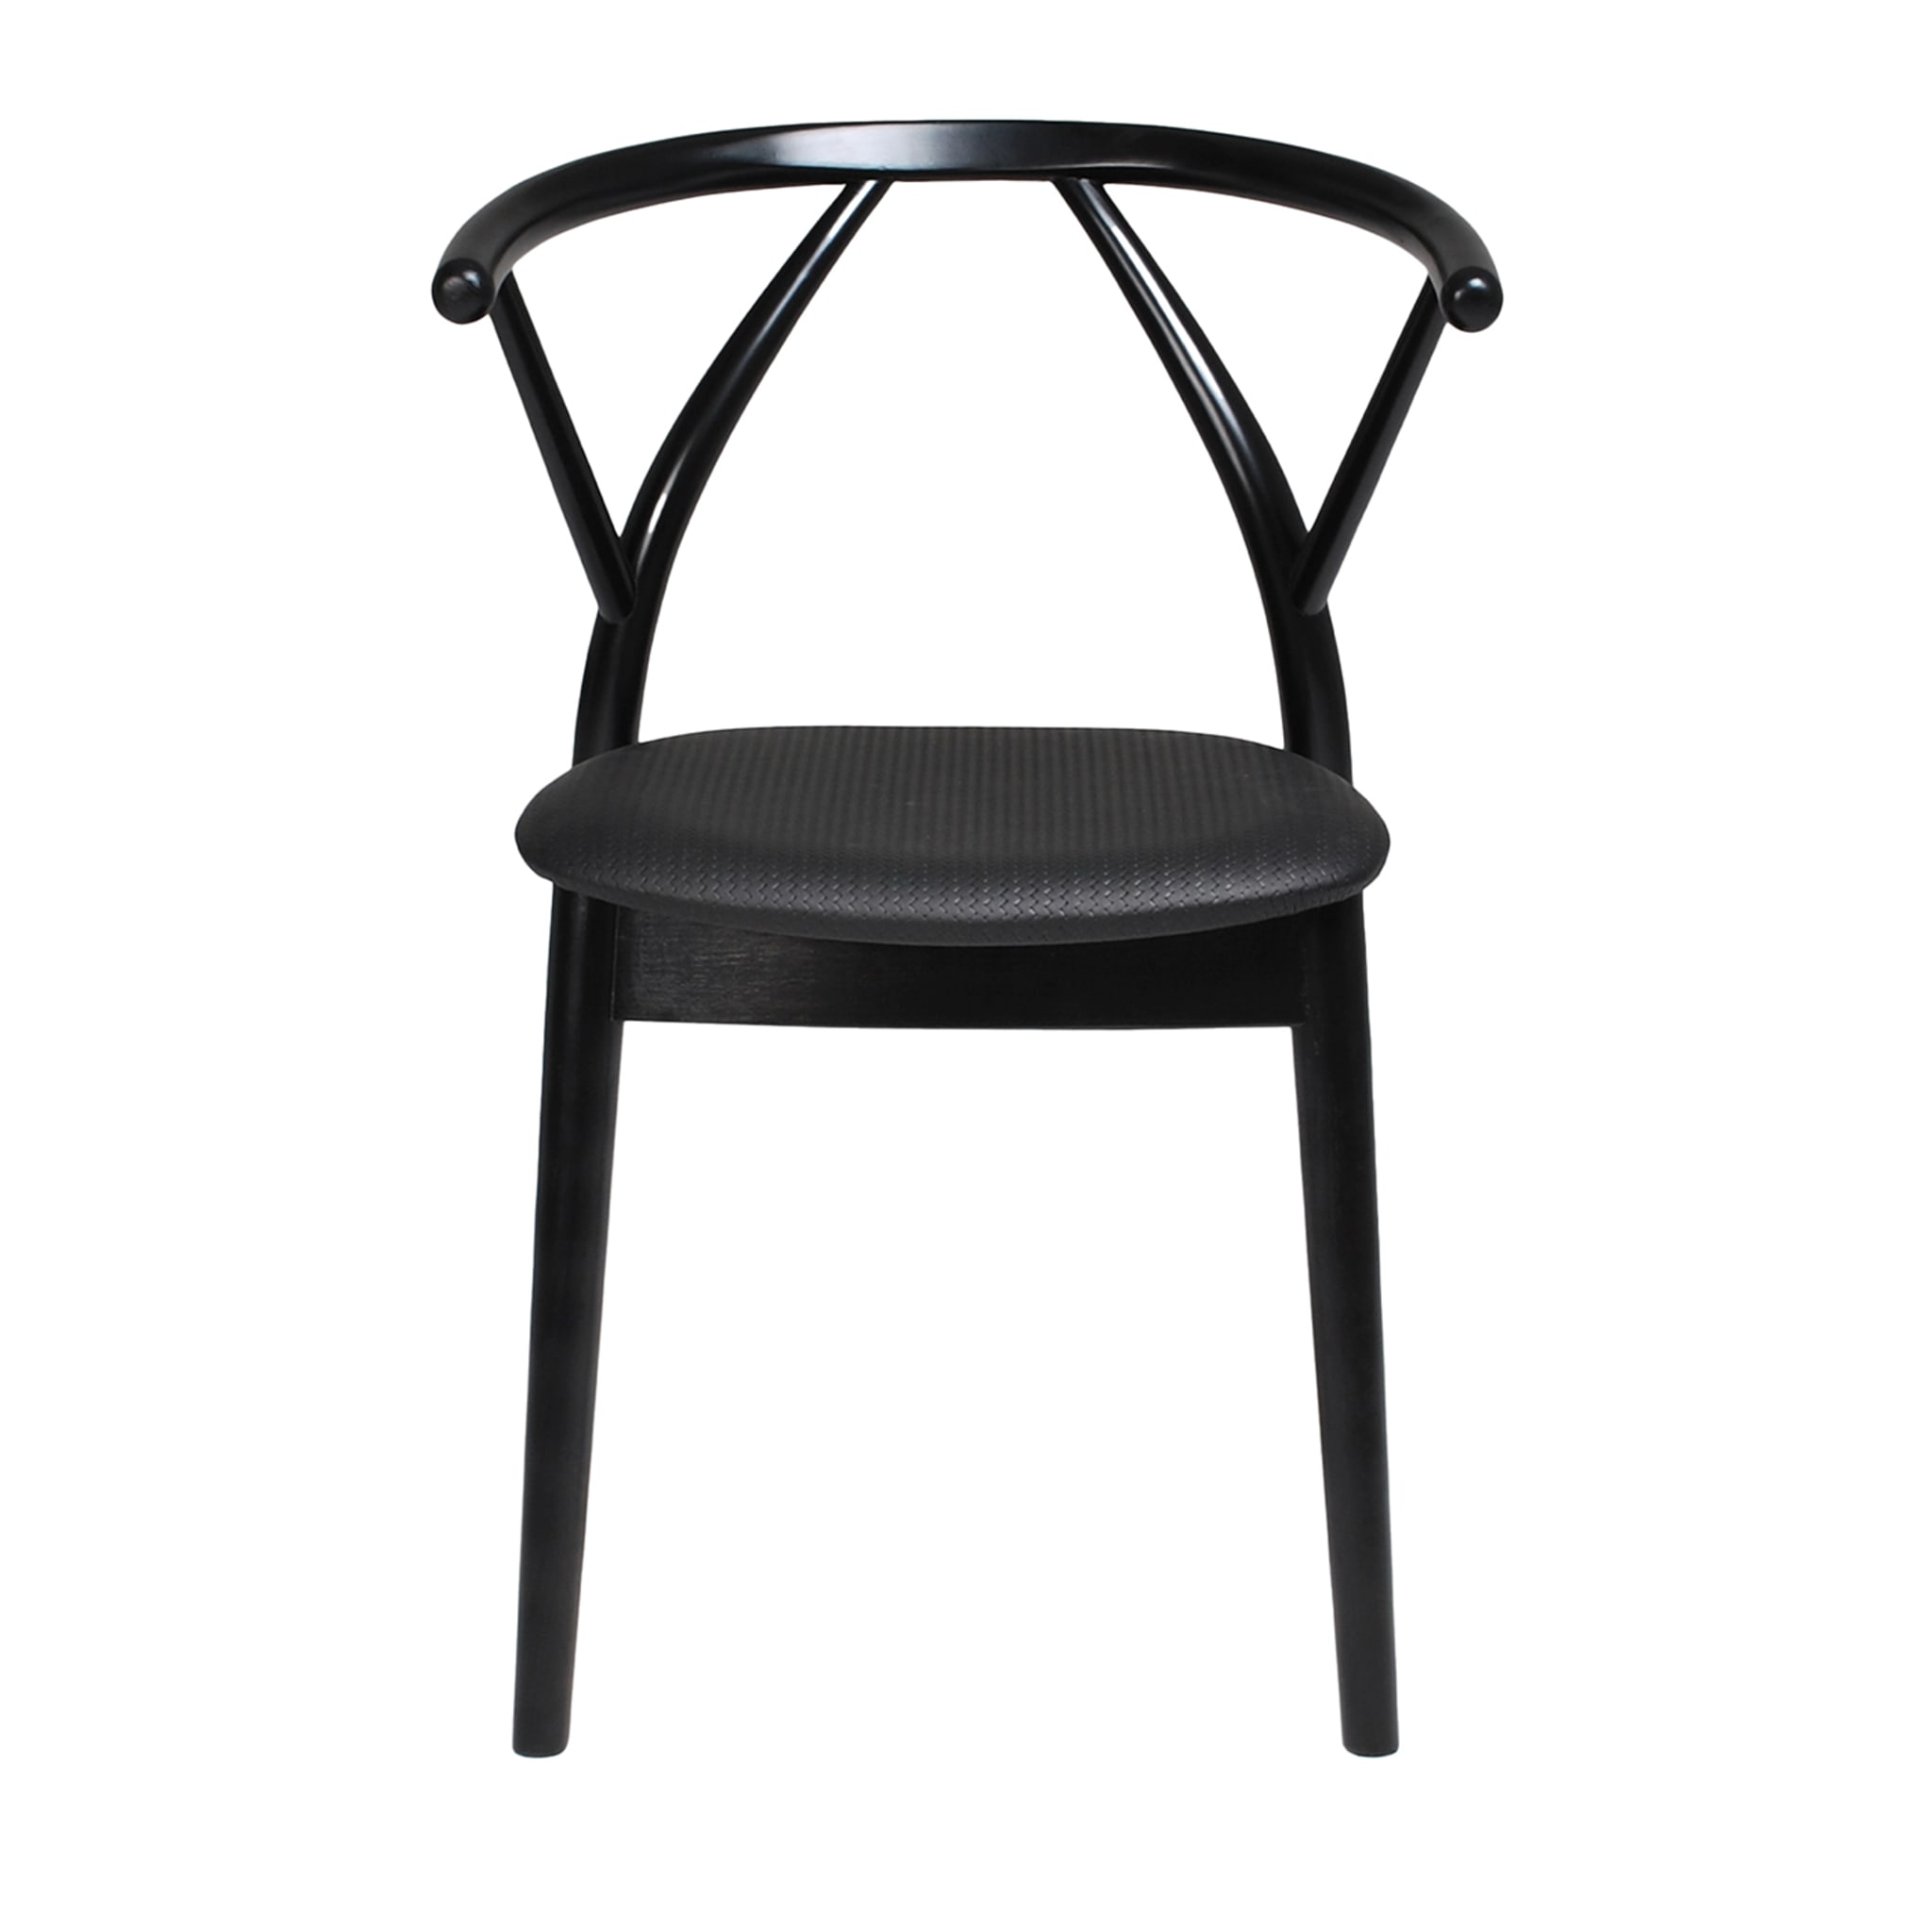 Yelly 970 Black Chair by Markus Johansson - Main view